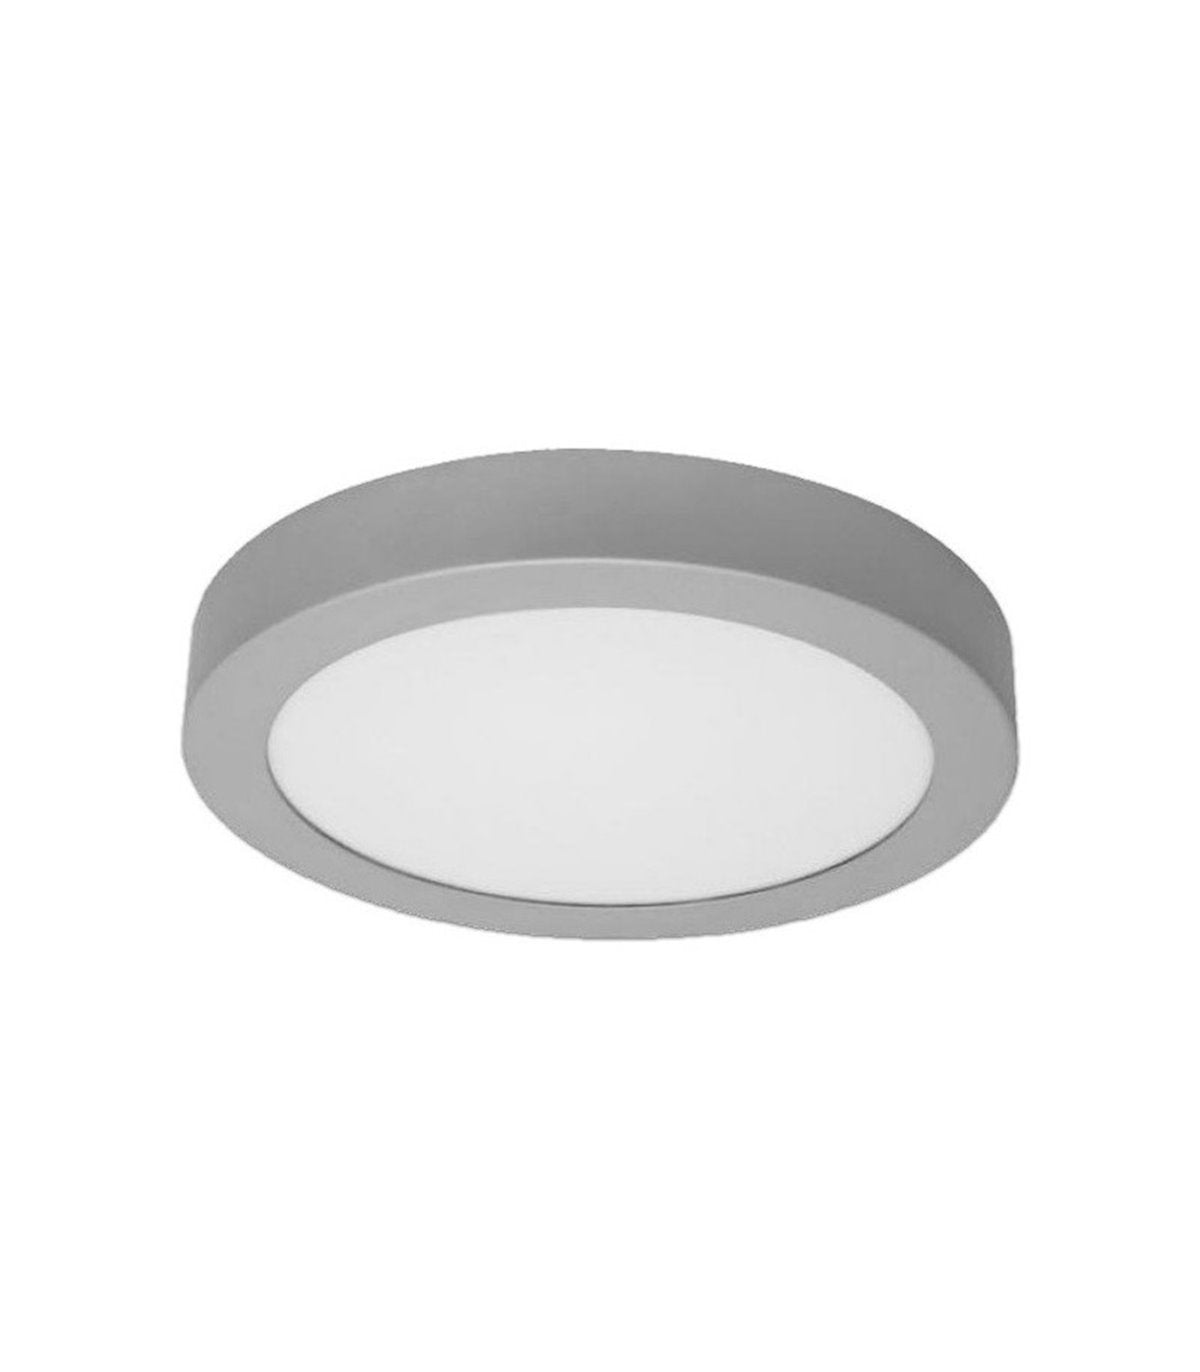 ROUND SUPERPOSED CEILING PAD SILVER GRAY LED 20W 3000K 4000K 6000K IP20